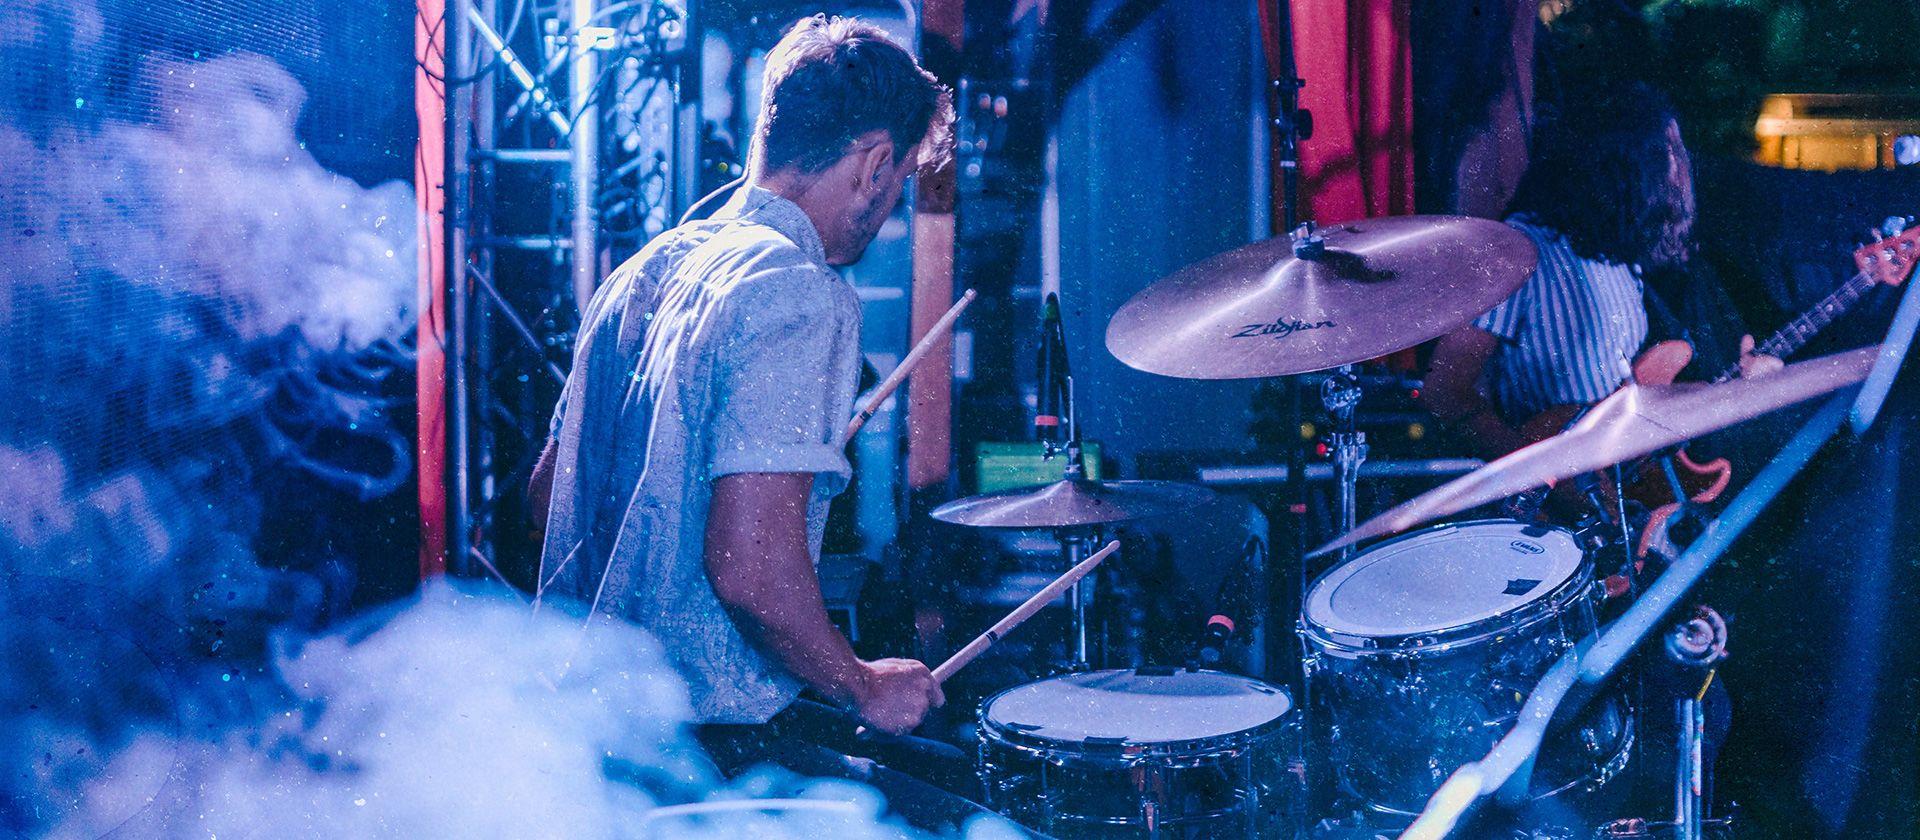 Man playing the drums in blue light amongst smoke on stage.